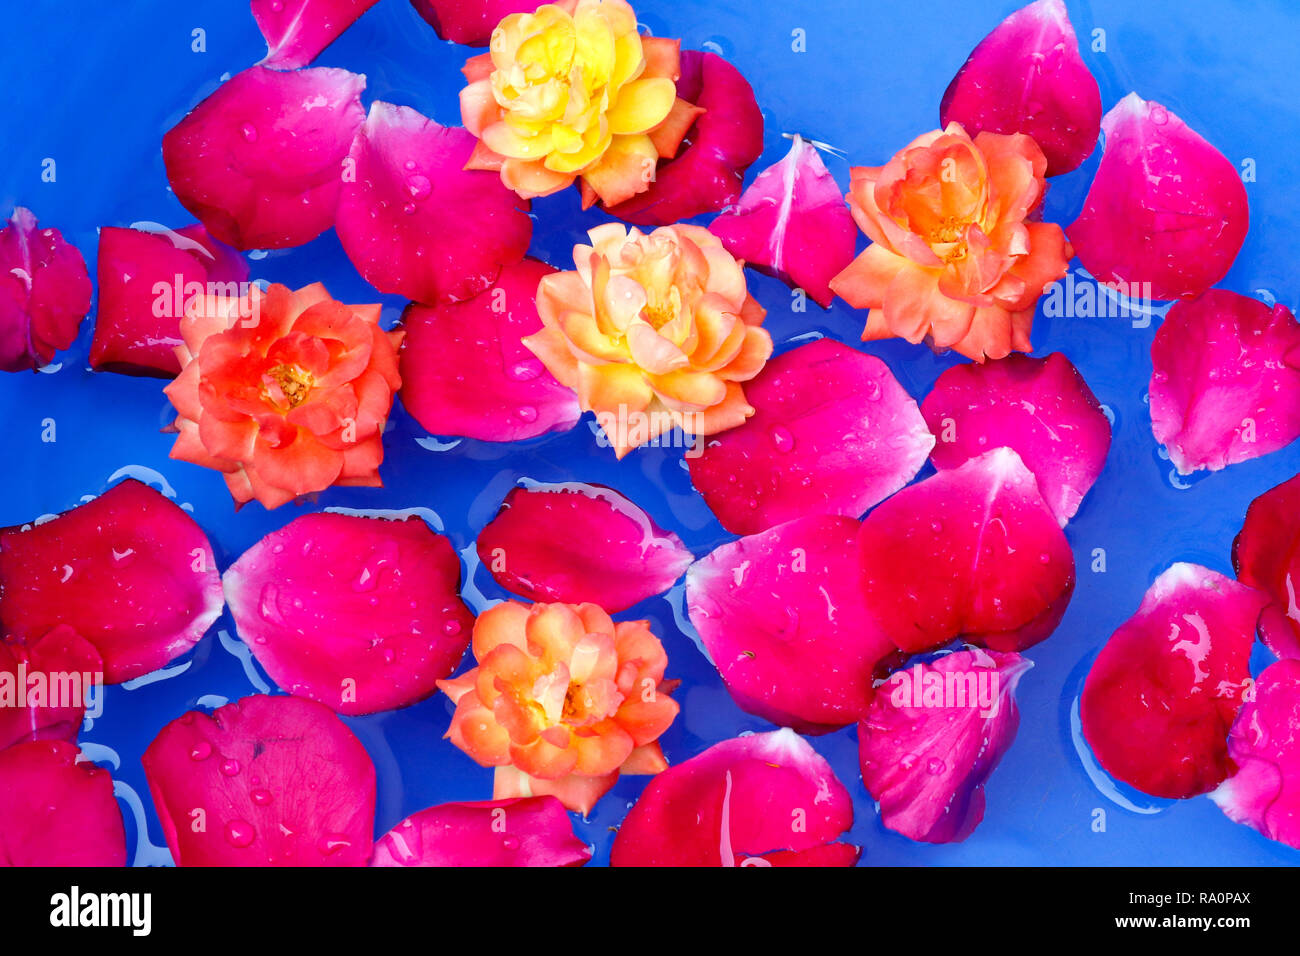 Red rose petals and yellow rose flower floting in water, blue background Stock Photo